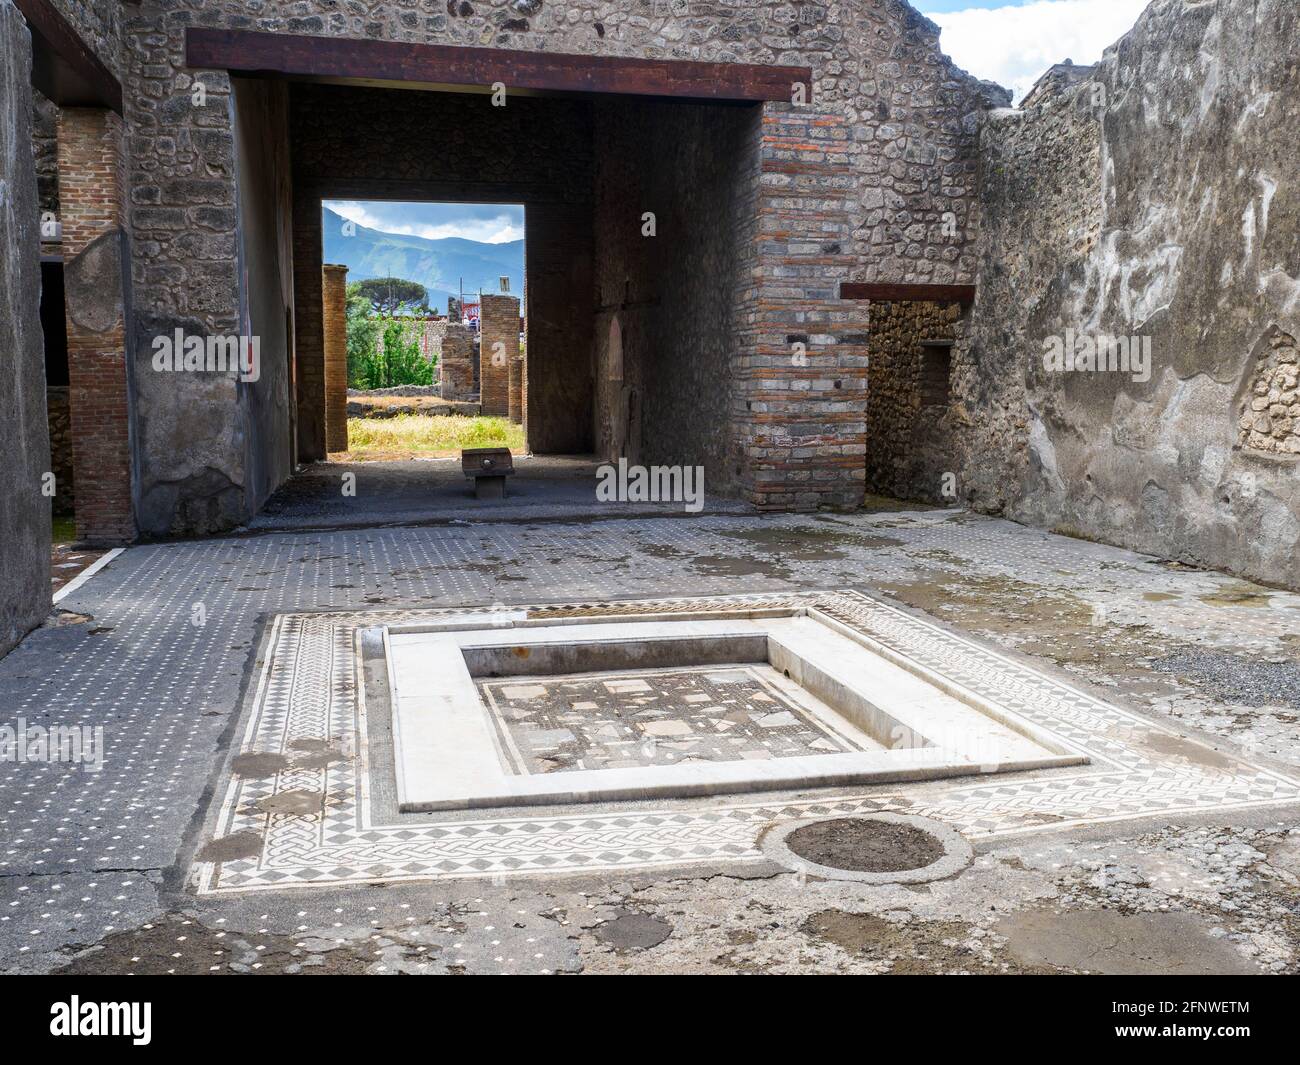 Square atrium which has a central impluvium. The floor of the atrium consists of crushed lava decorated with small chips of white marble. Casa del frutteto (House of the Orchard) - Pompeii archaeological site, Italy Stock Photo